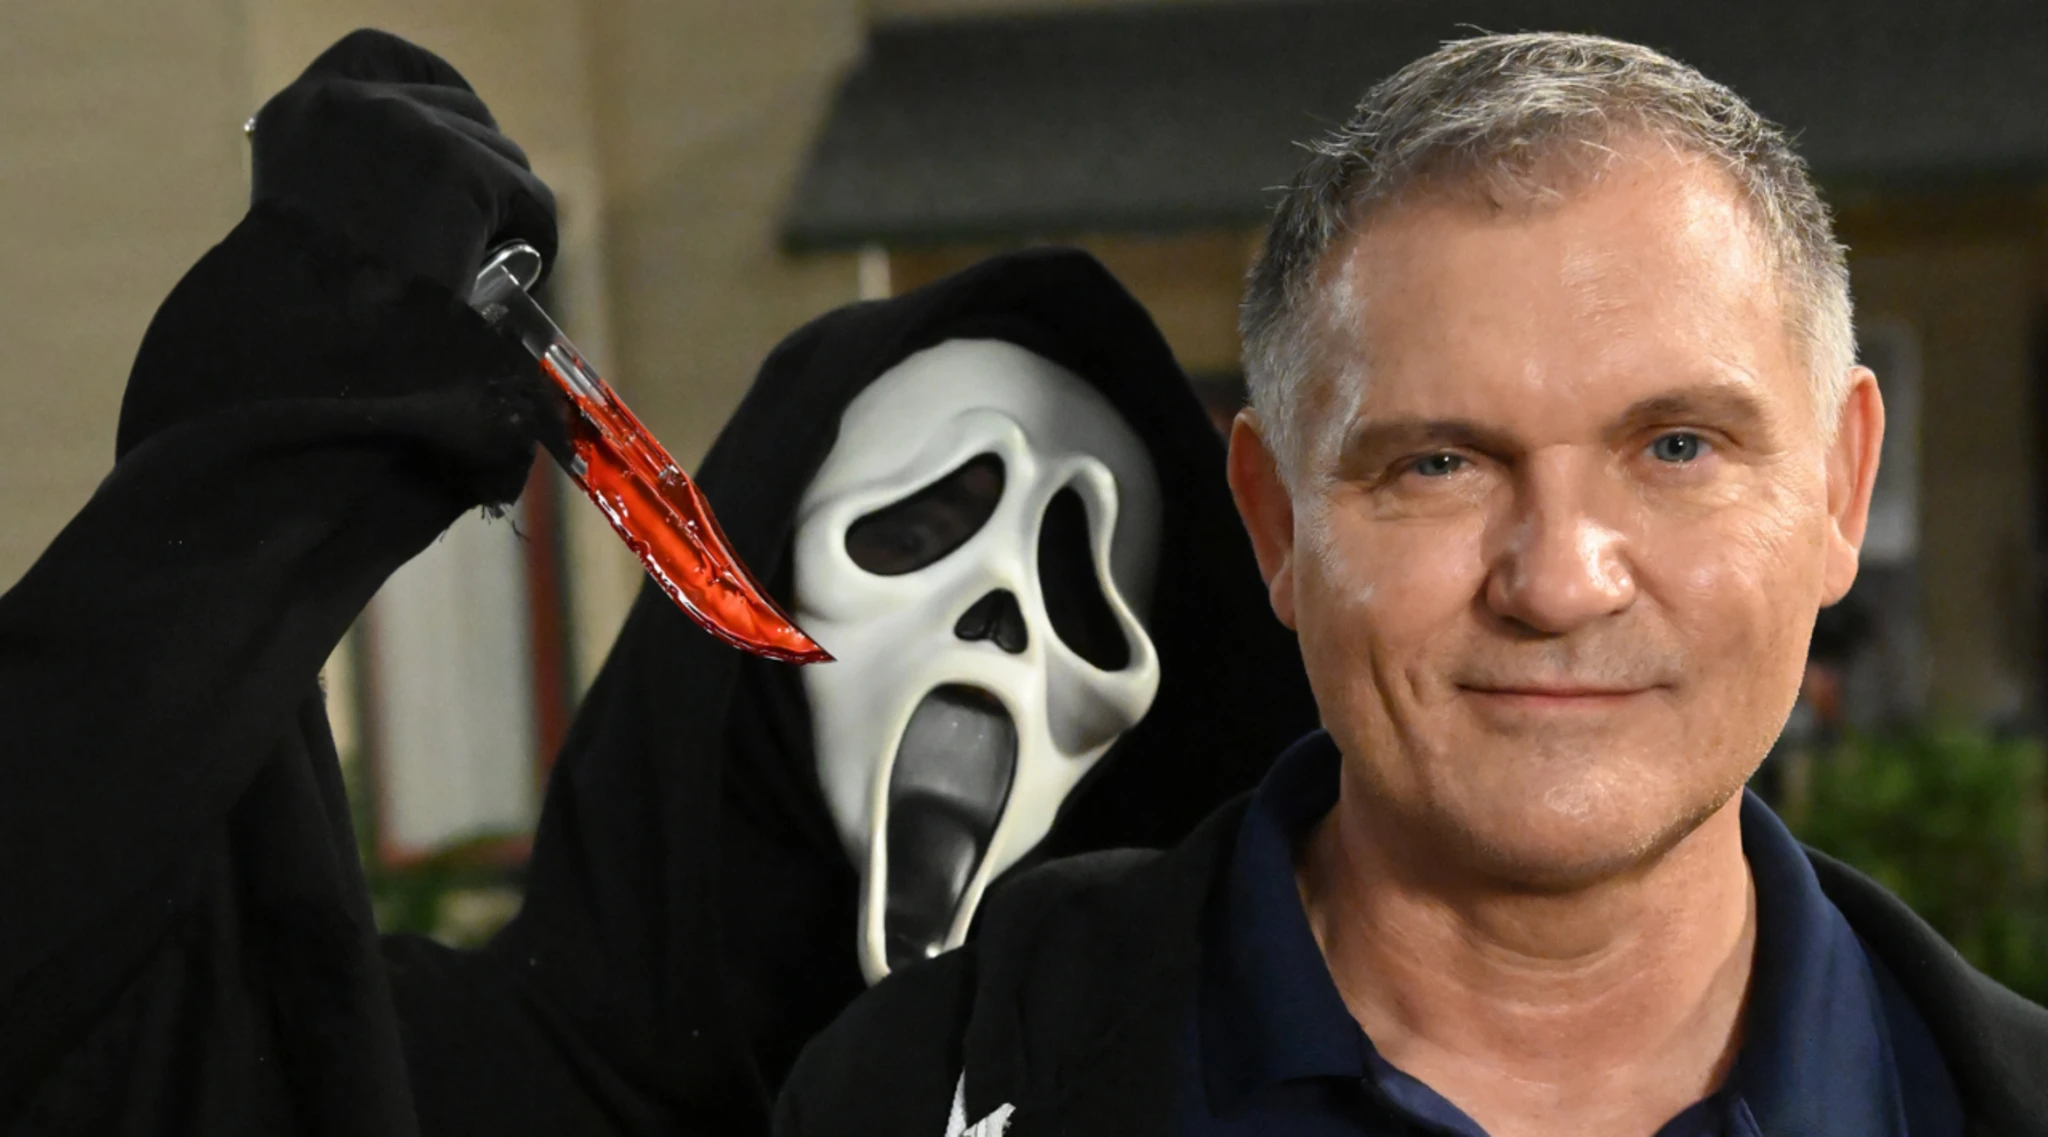 Kevin Williamson on Making 'Scream' Without Wes Craven (Exclusive)